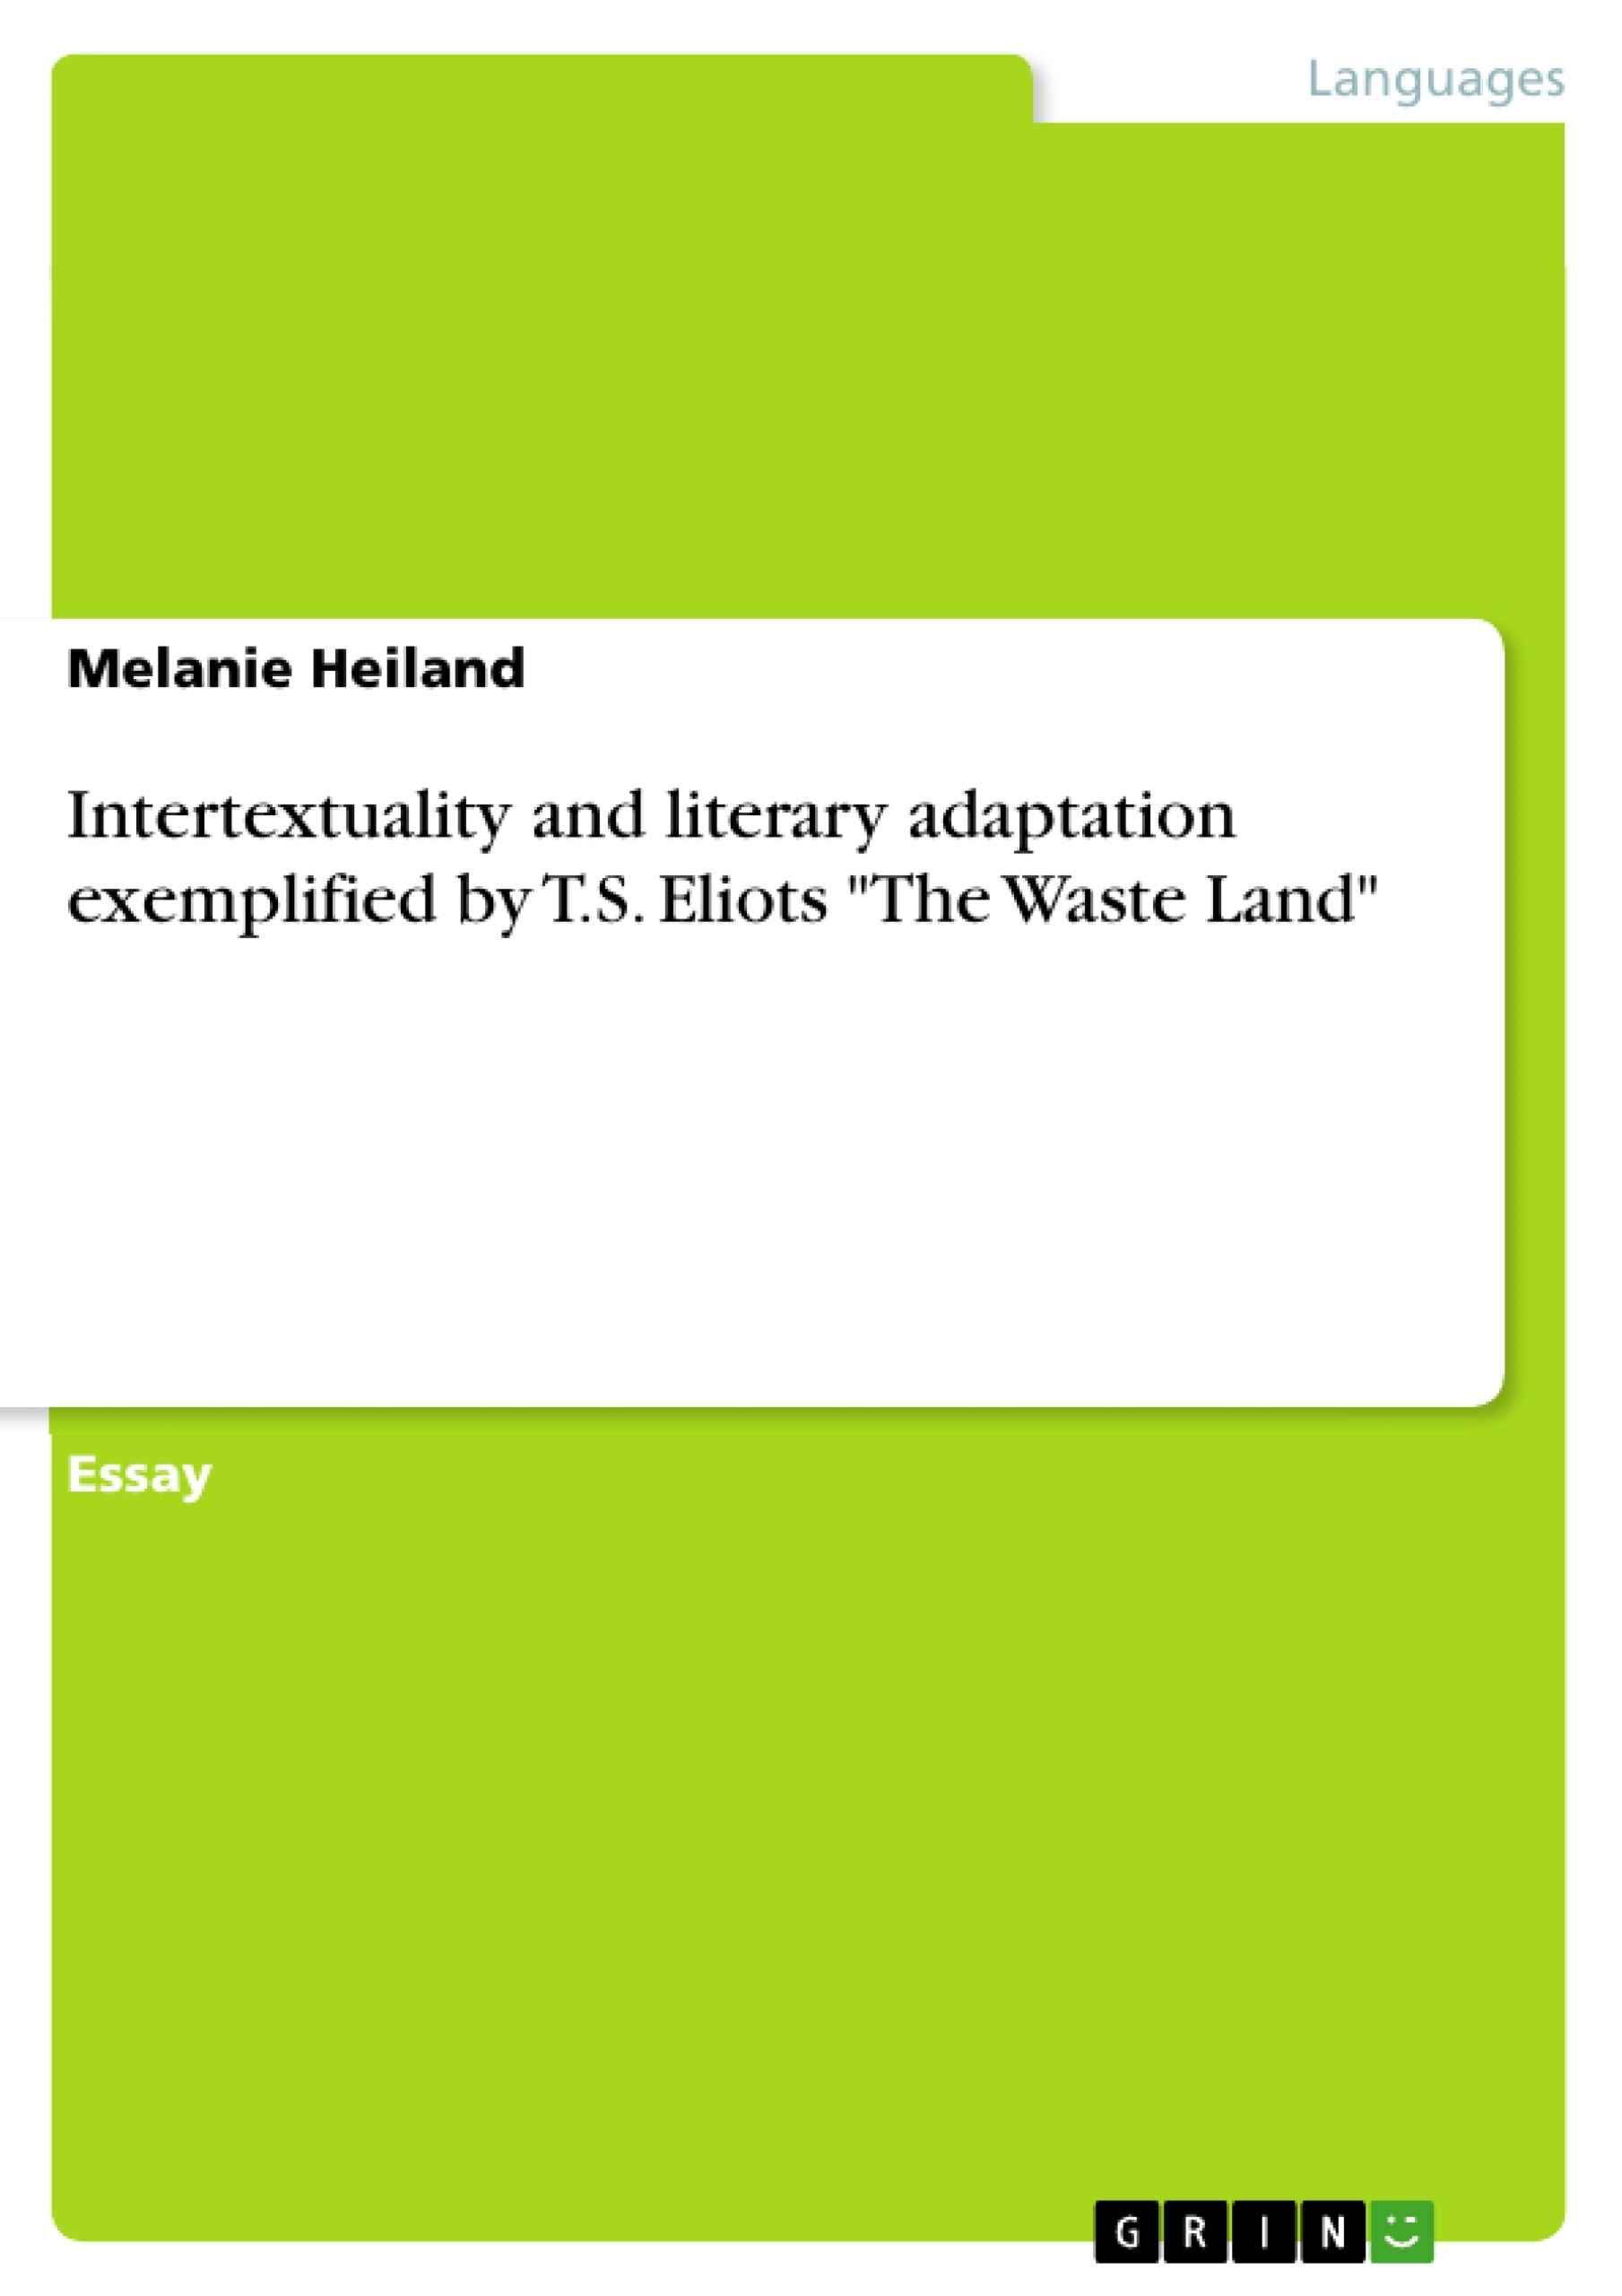 Titre: Intertextuality and literary adaptation exemplified by T.S. Eliots "The Waste Land"